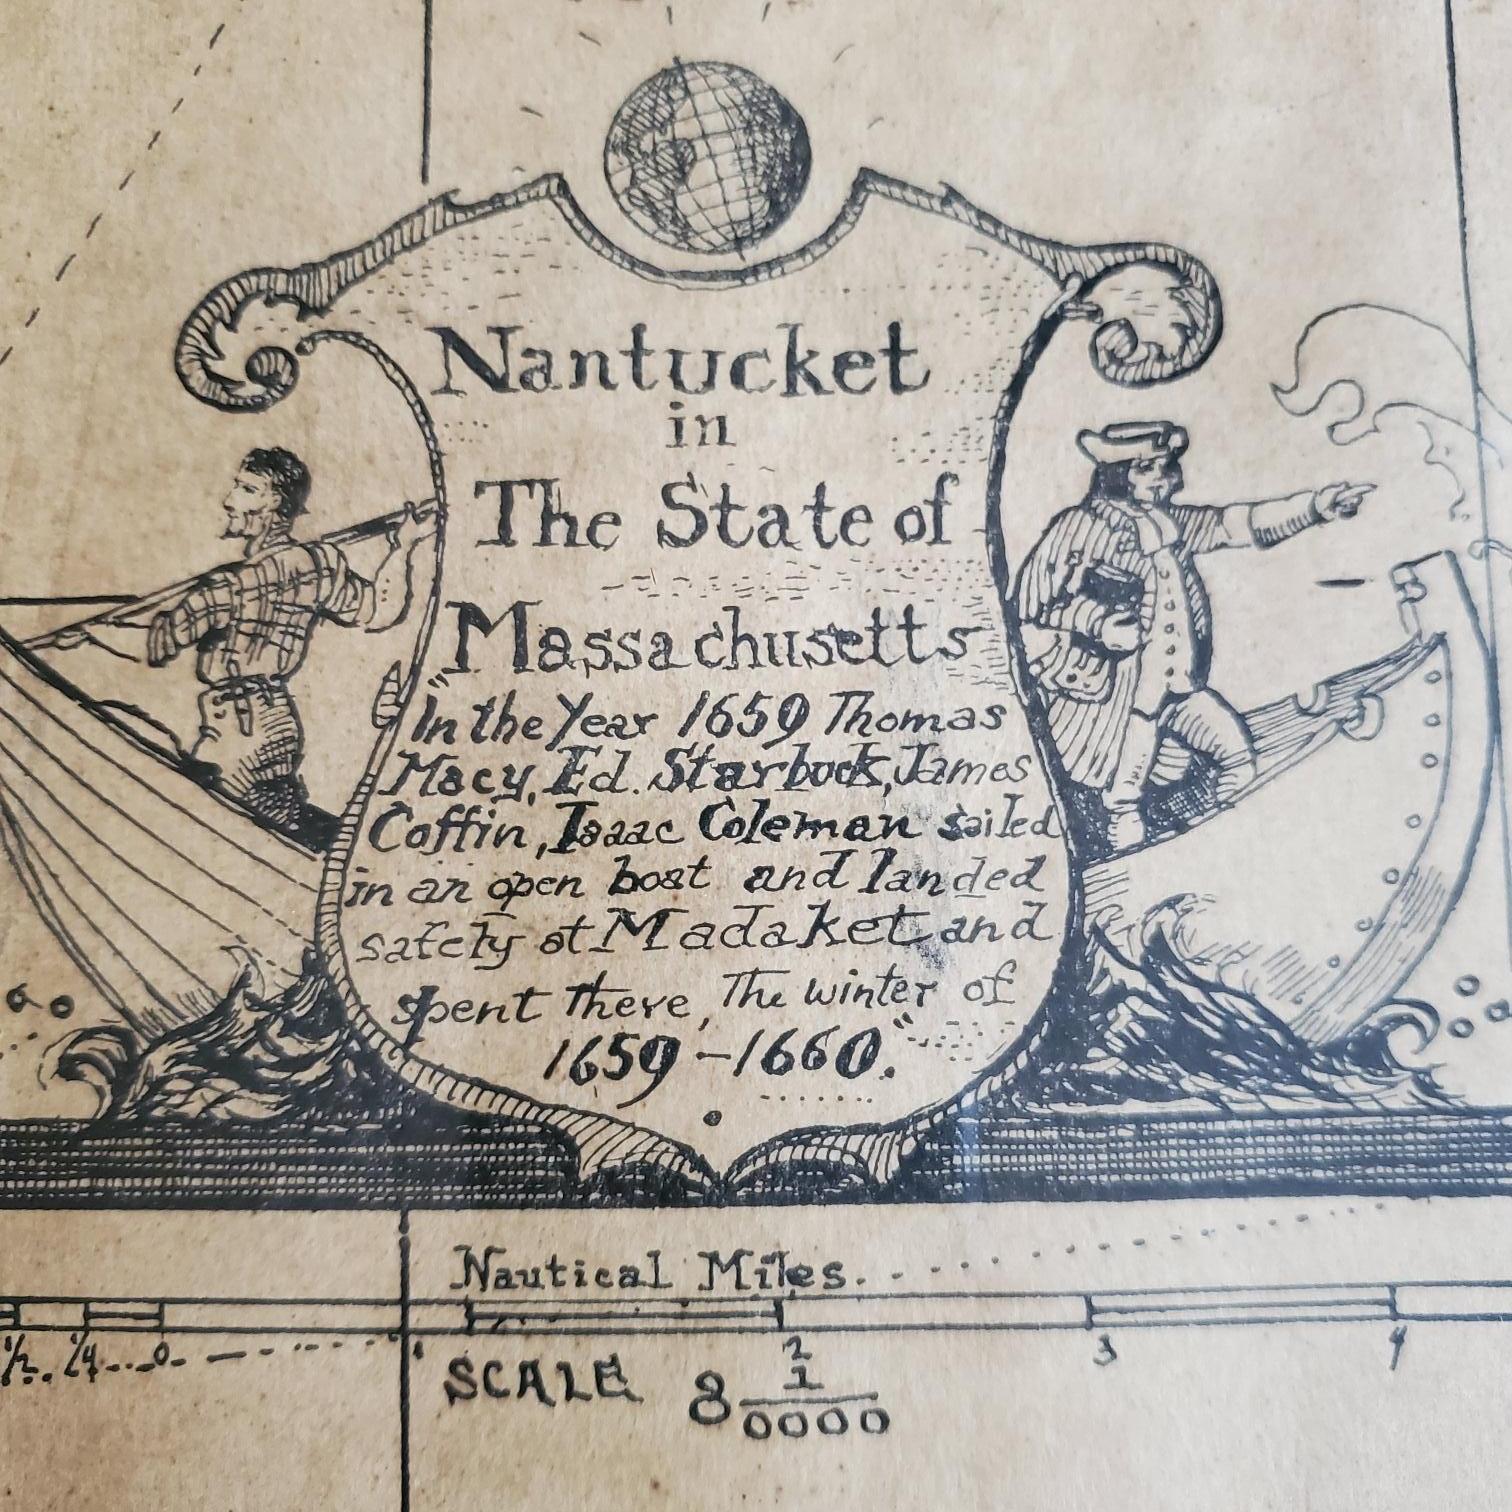 Map of Nantucket by Austin Strong (1881 - 1952), circa 1925, an original print on paper whimsical map of Nantucket Island by Robert Louis Stevenson's step- grandson, noted stage set designer, artist and Nantucket cultural icon Austin Strong. The map